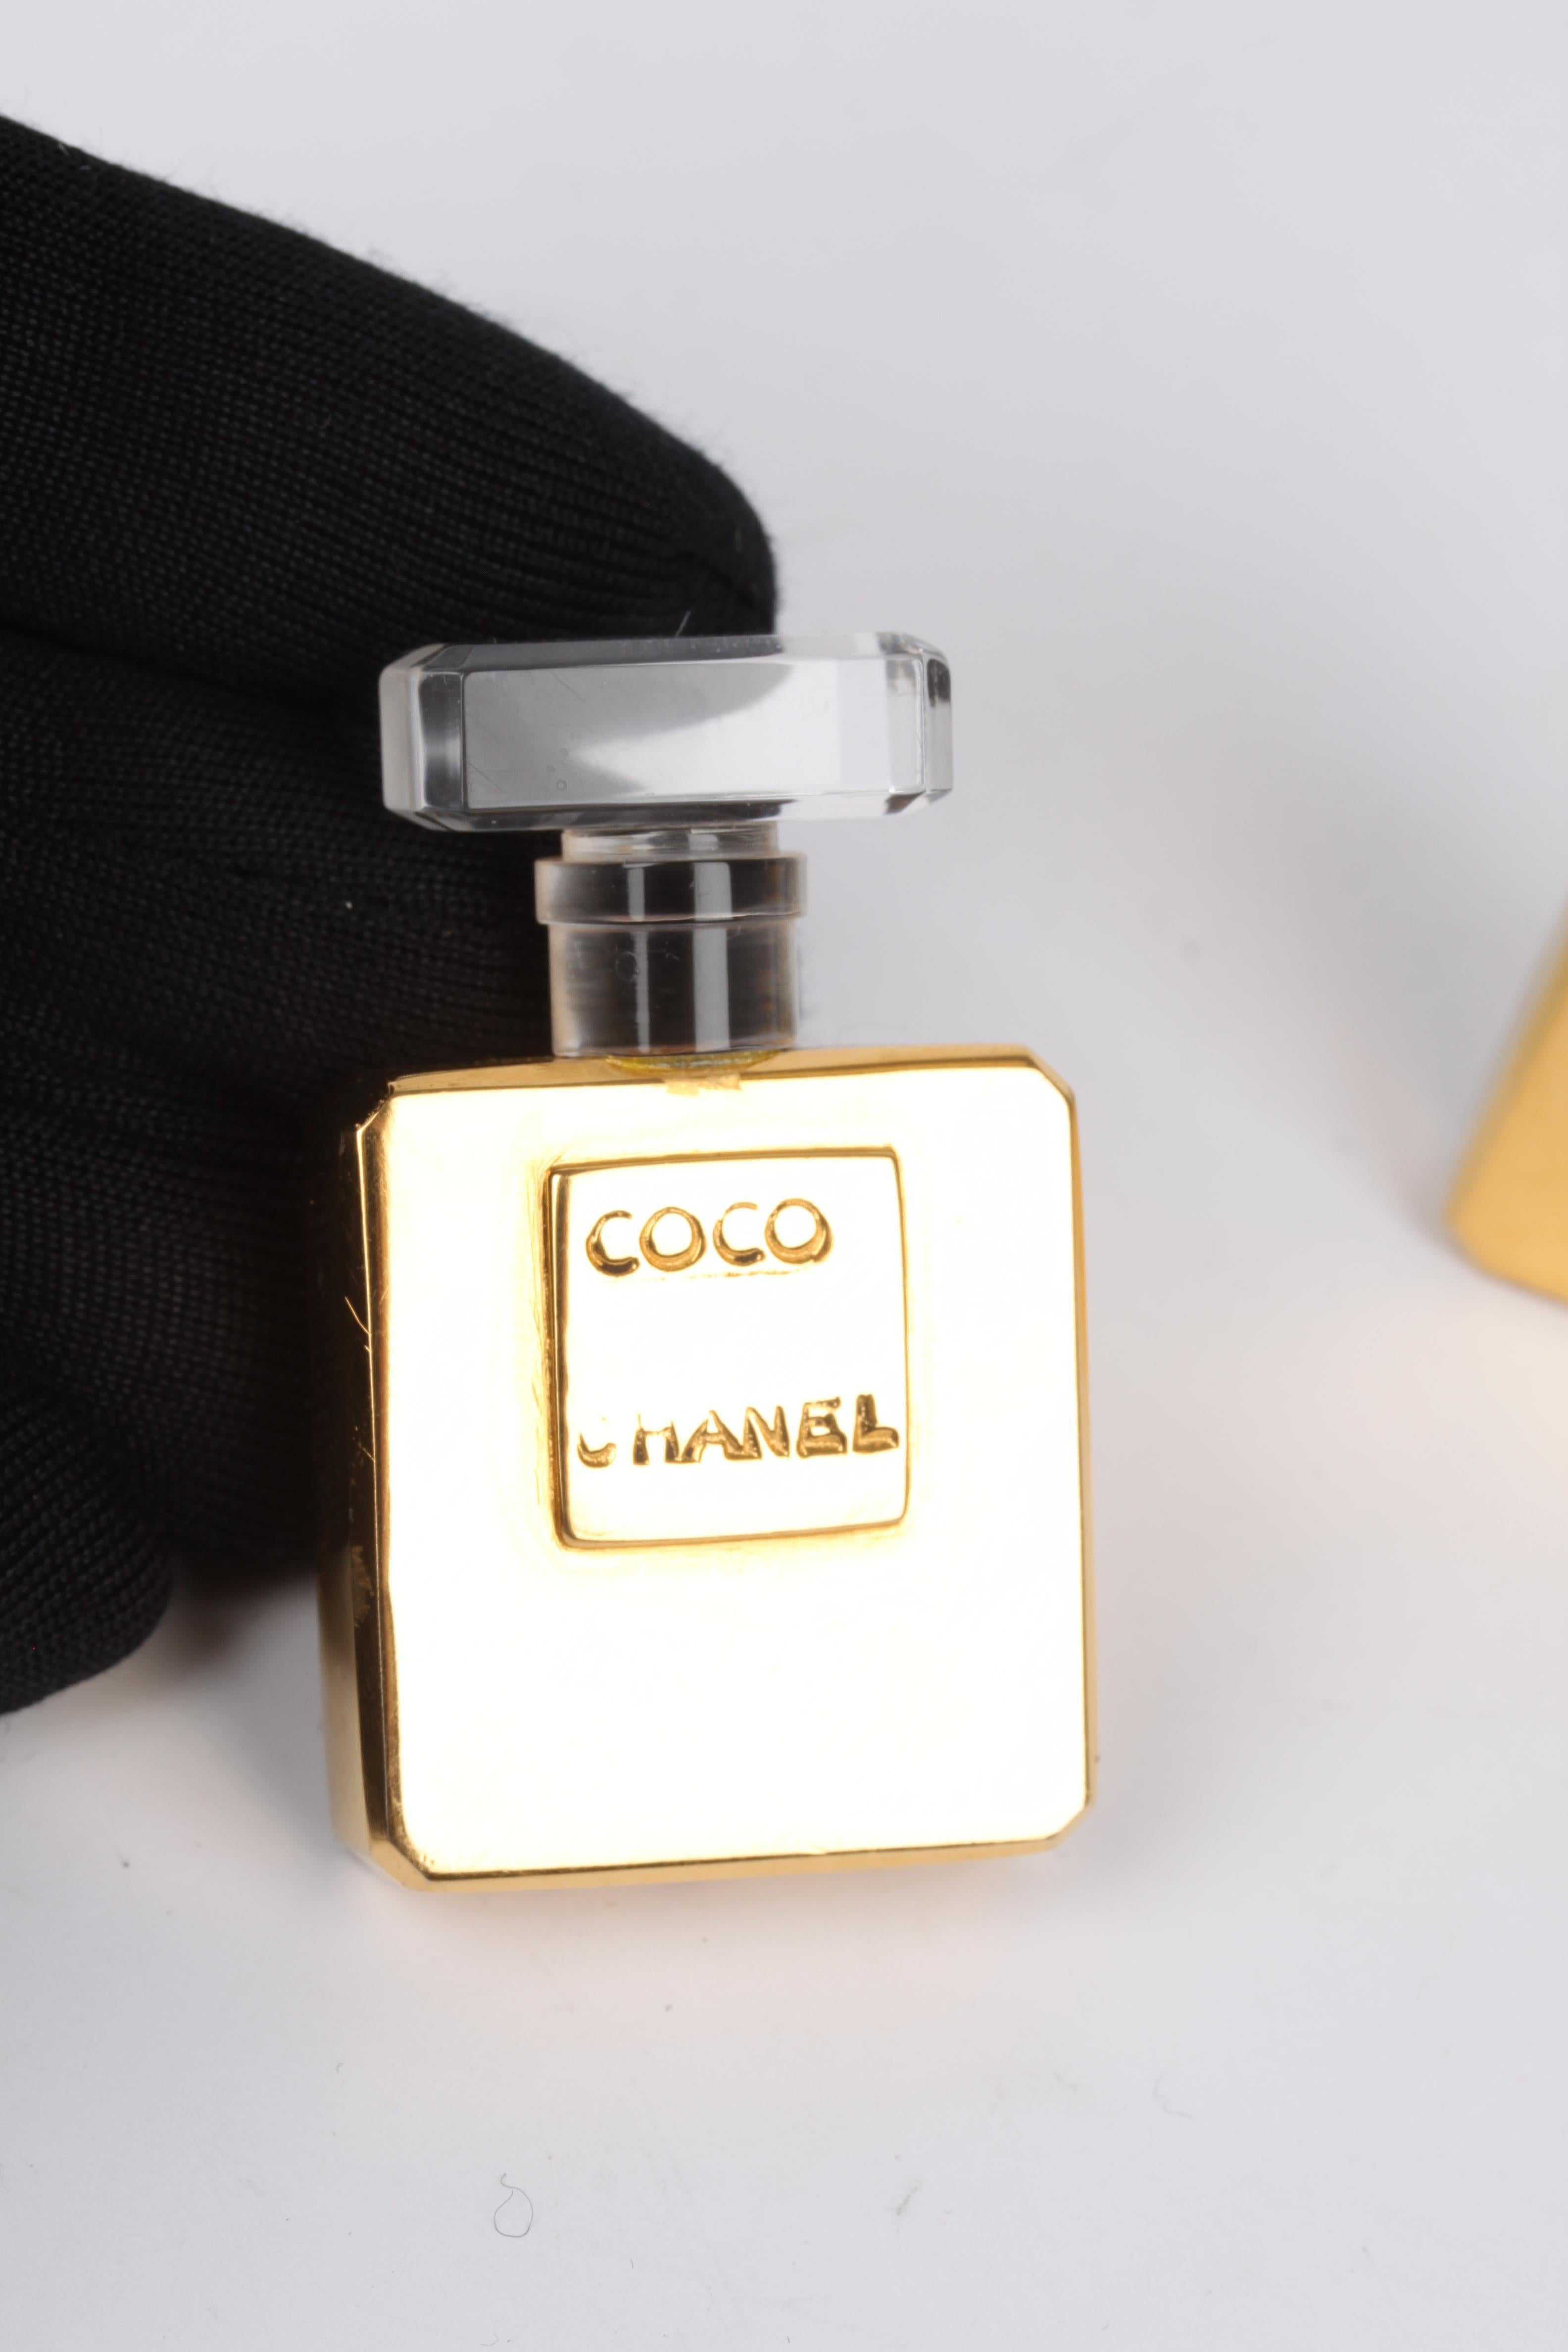 This wonderful set of Chanel earrings is from the 80's, true vintage!

Clip-on earrings in the shape of a gold-tone perfume bottle, of course with the words COCO CHANEL embossed. On top the bottle is translucent. Statement pieces!

In good vintage